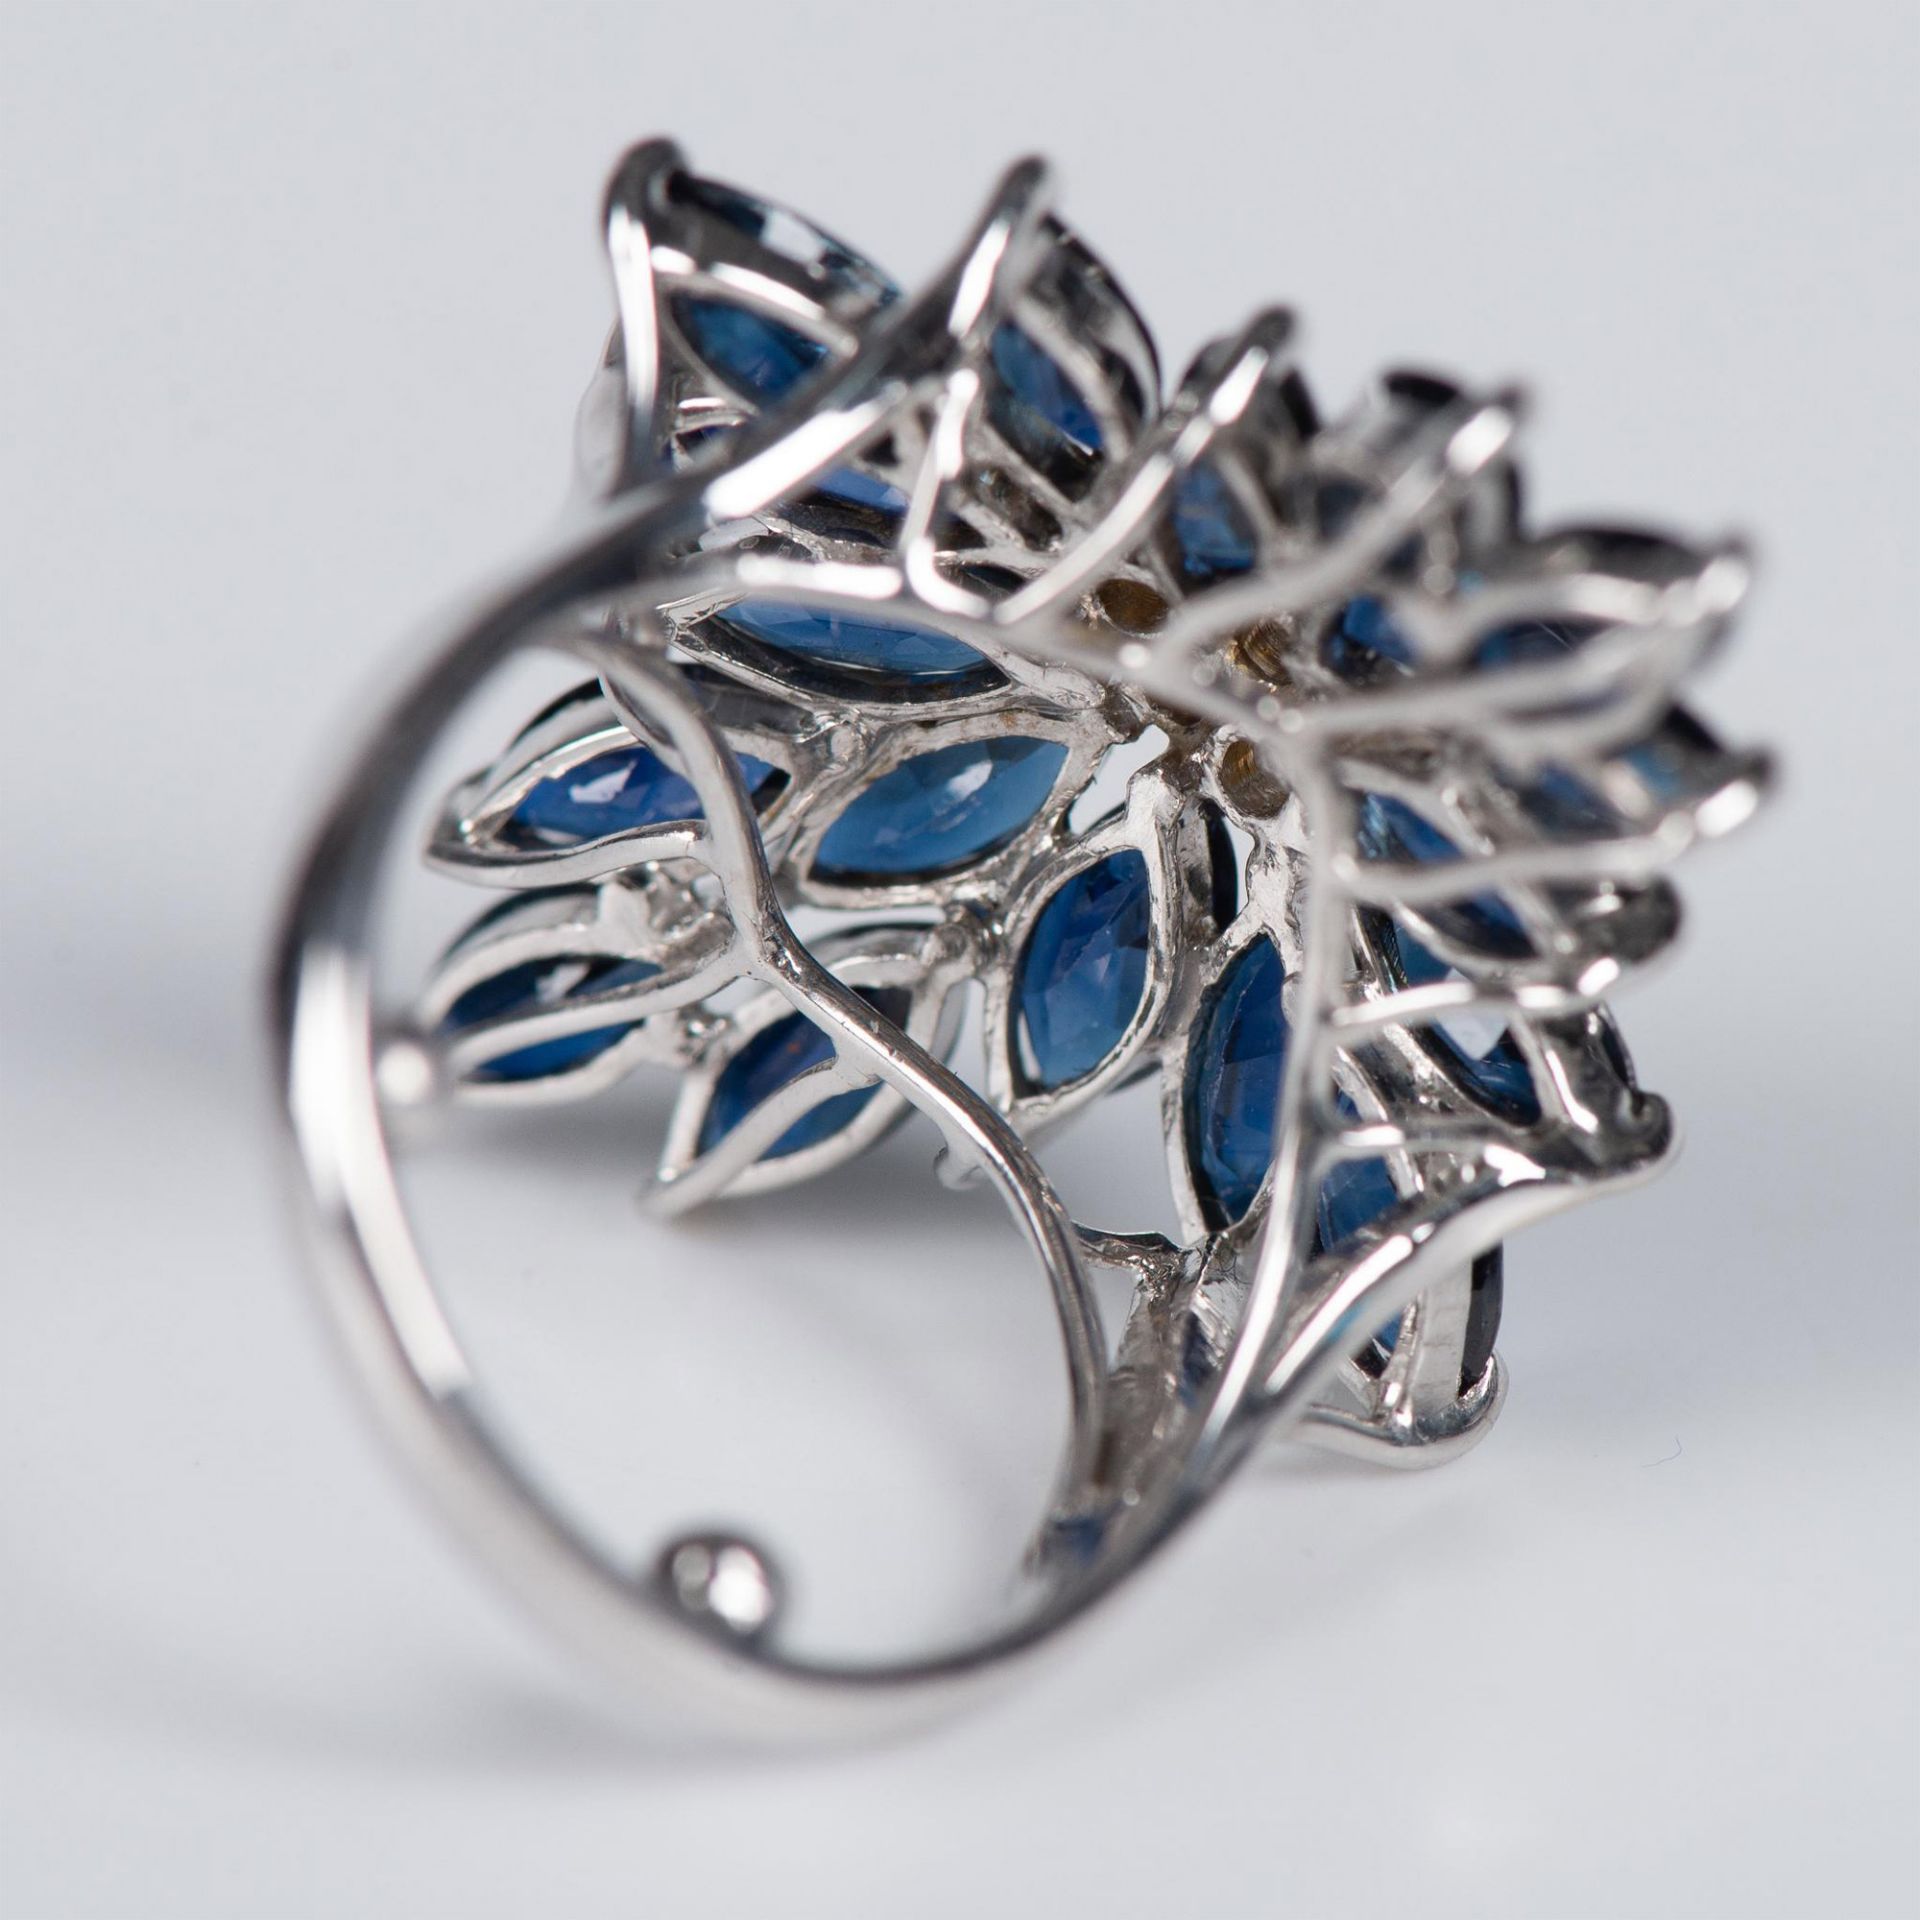 Fabulous 18k White Gold, Sapphire and Diamond Cocktail Ring - Image 3 of 7